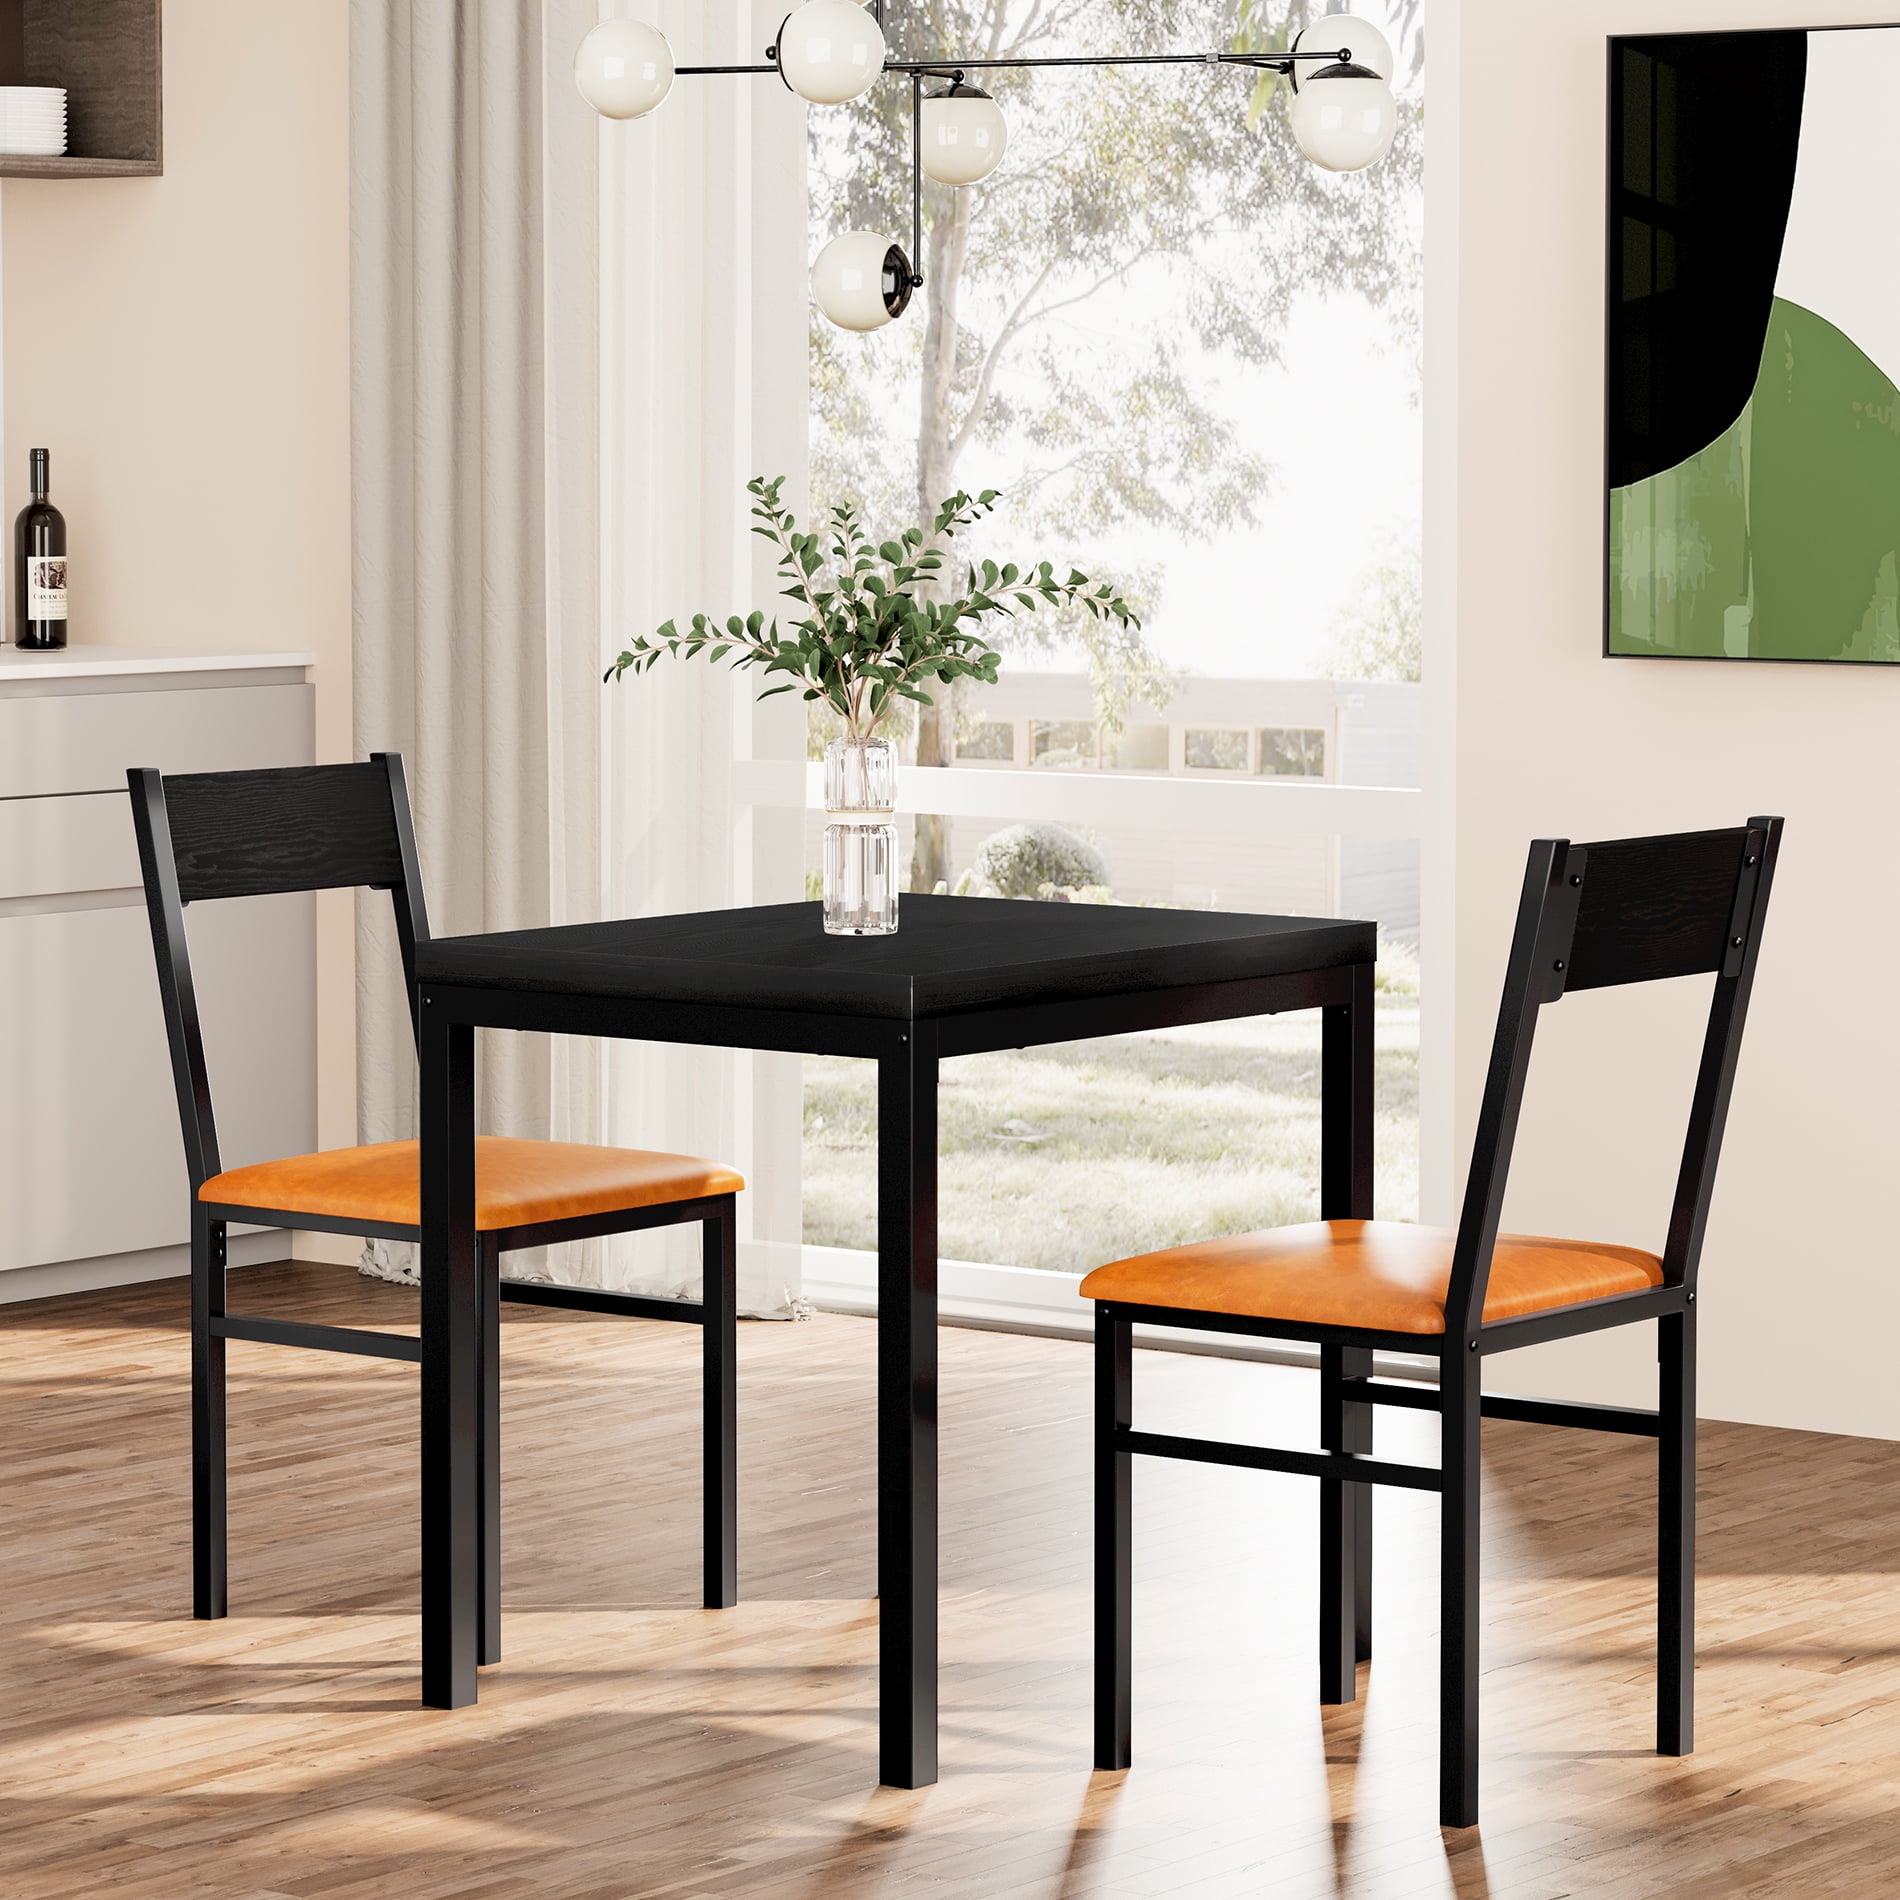 3-Piece Black Dining Table Set Cushioned Chairs Small Kitchen Table 29